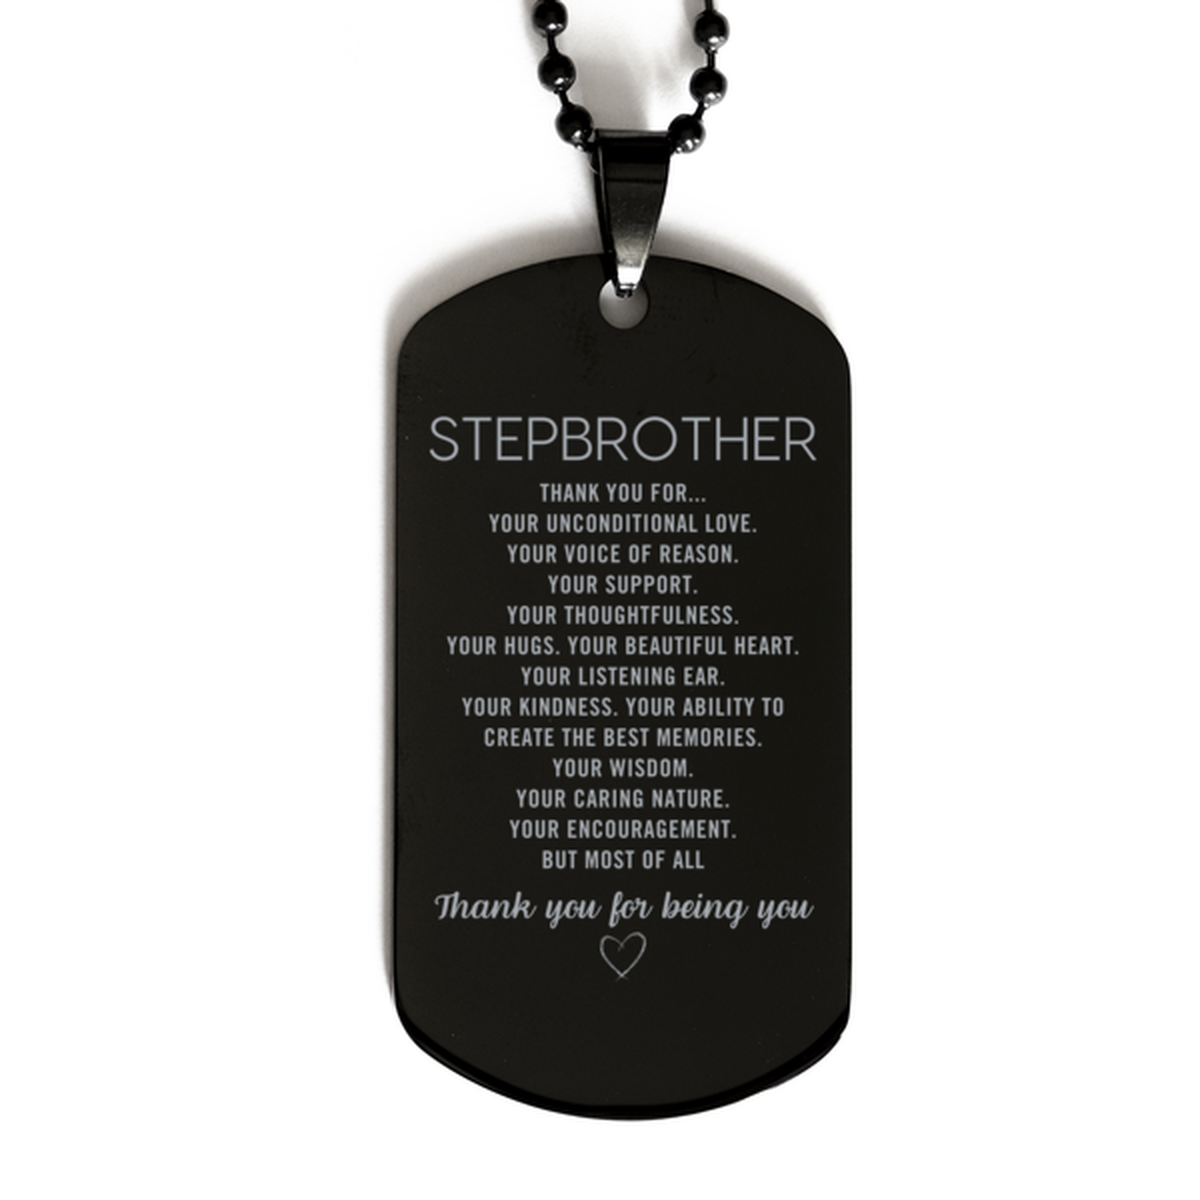 Stepbrother Black Dog Tag Custom, Engraved Gifts For Stepbrother Christmas Graduation Birthday Gifts for Men Women Stepbrother Thank you for Your unconditional love